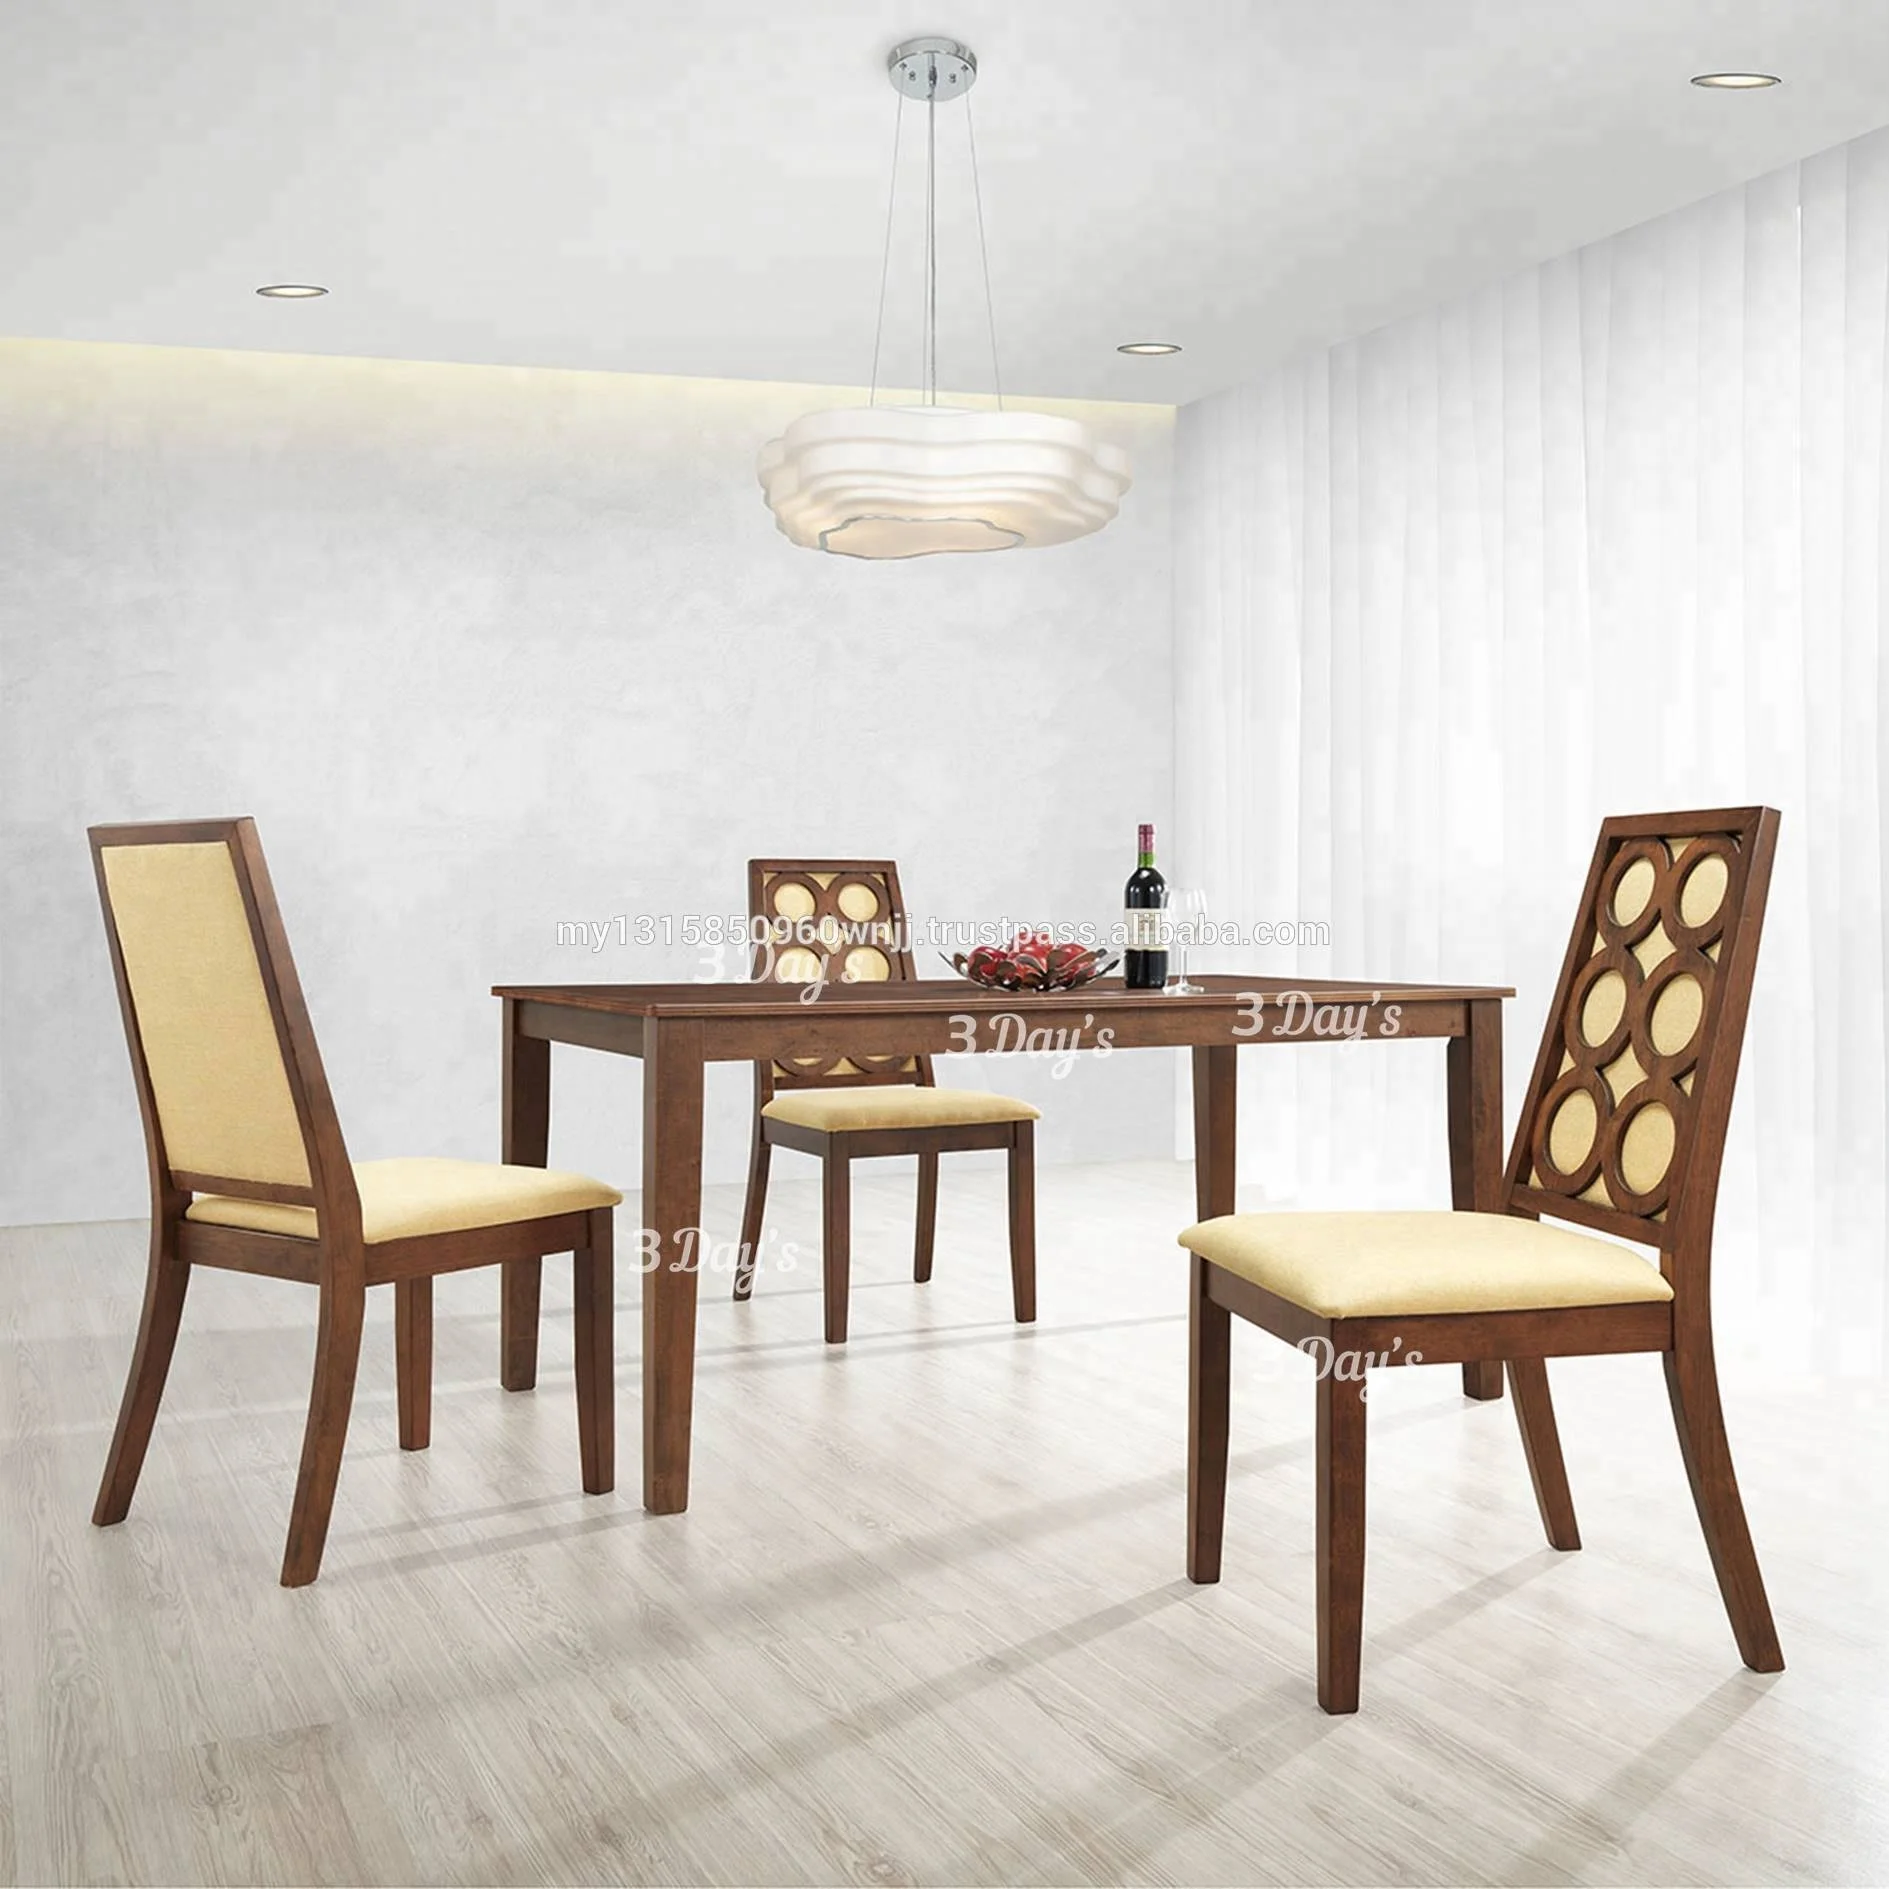 Modern Wooden Dining Room Set With Dining Table And Fabric Dining Chair Buy Dining Room Sets Dining Table Set Classic Dining Room Sets Product On Alibaba Com